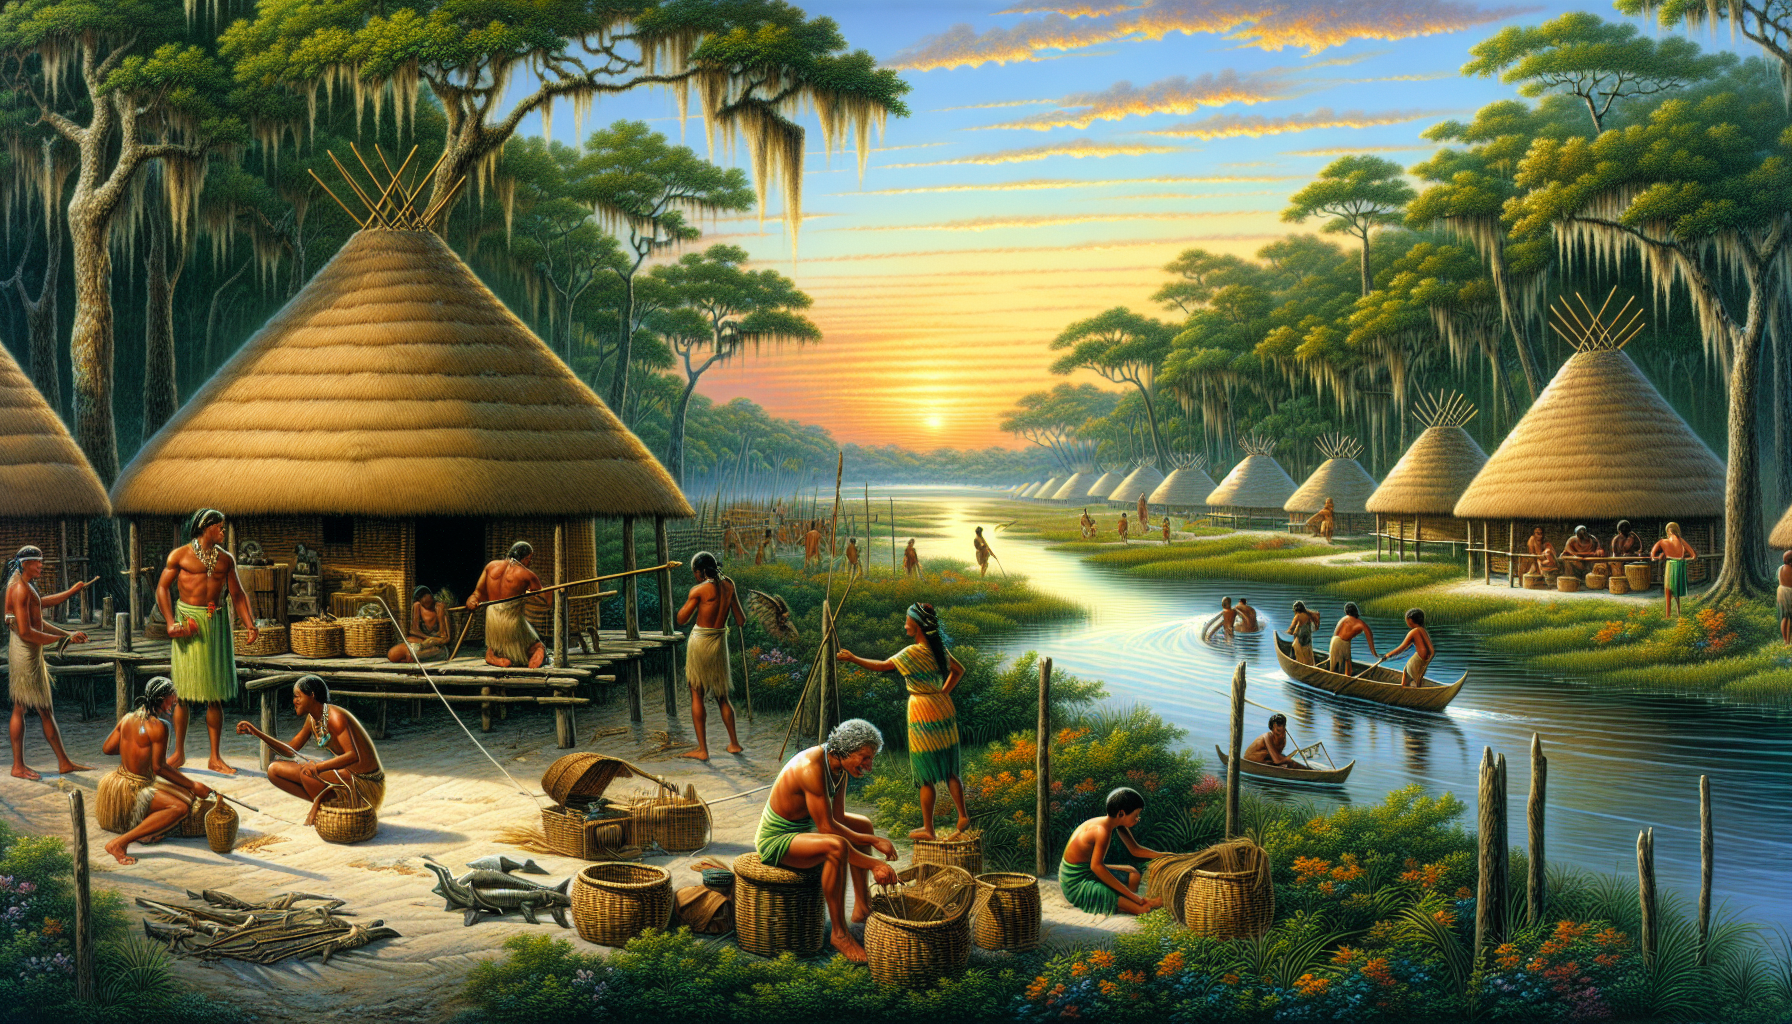 Illustration of Timucuan people in a village